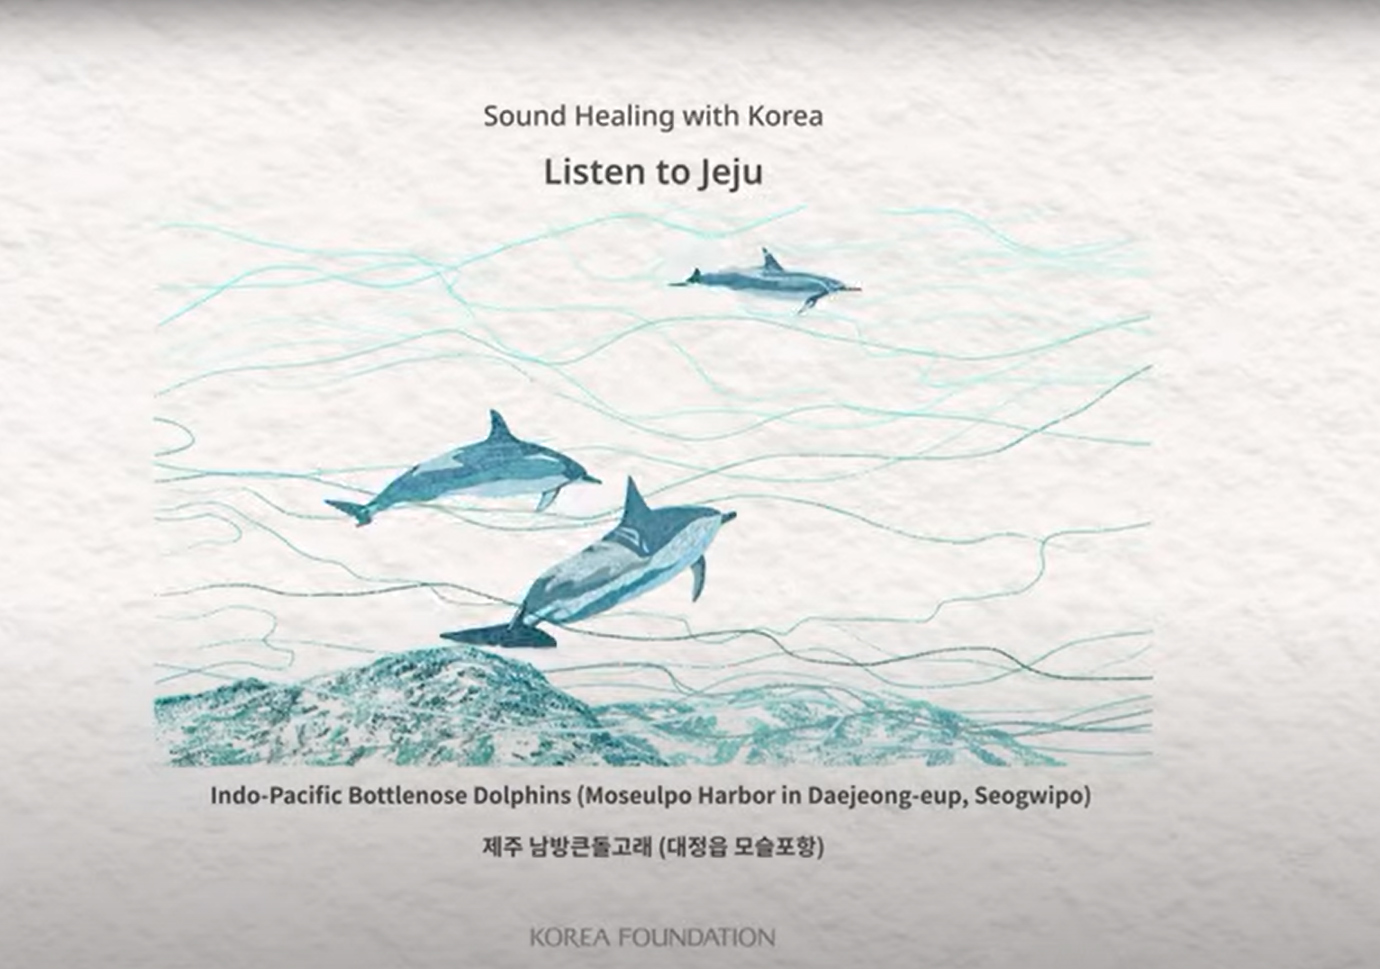 [ASMR] 2021 Sound <font color='red'>Healing</font> with Korea - Listen to Jeju | 3. Indo-Pacific Bottlenose Dolphins